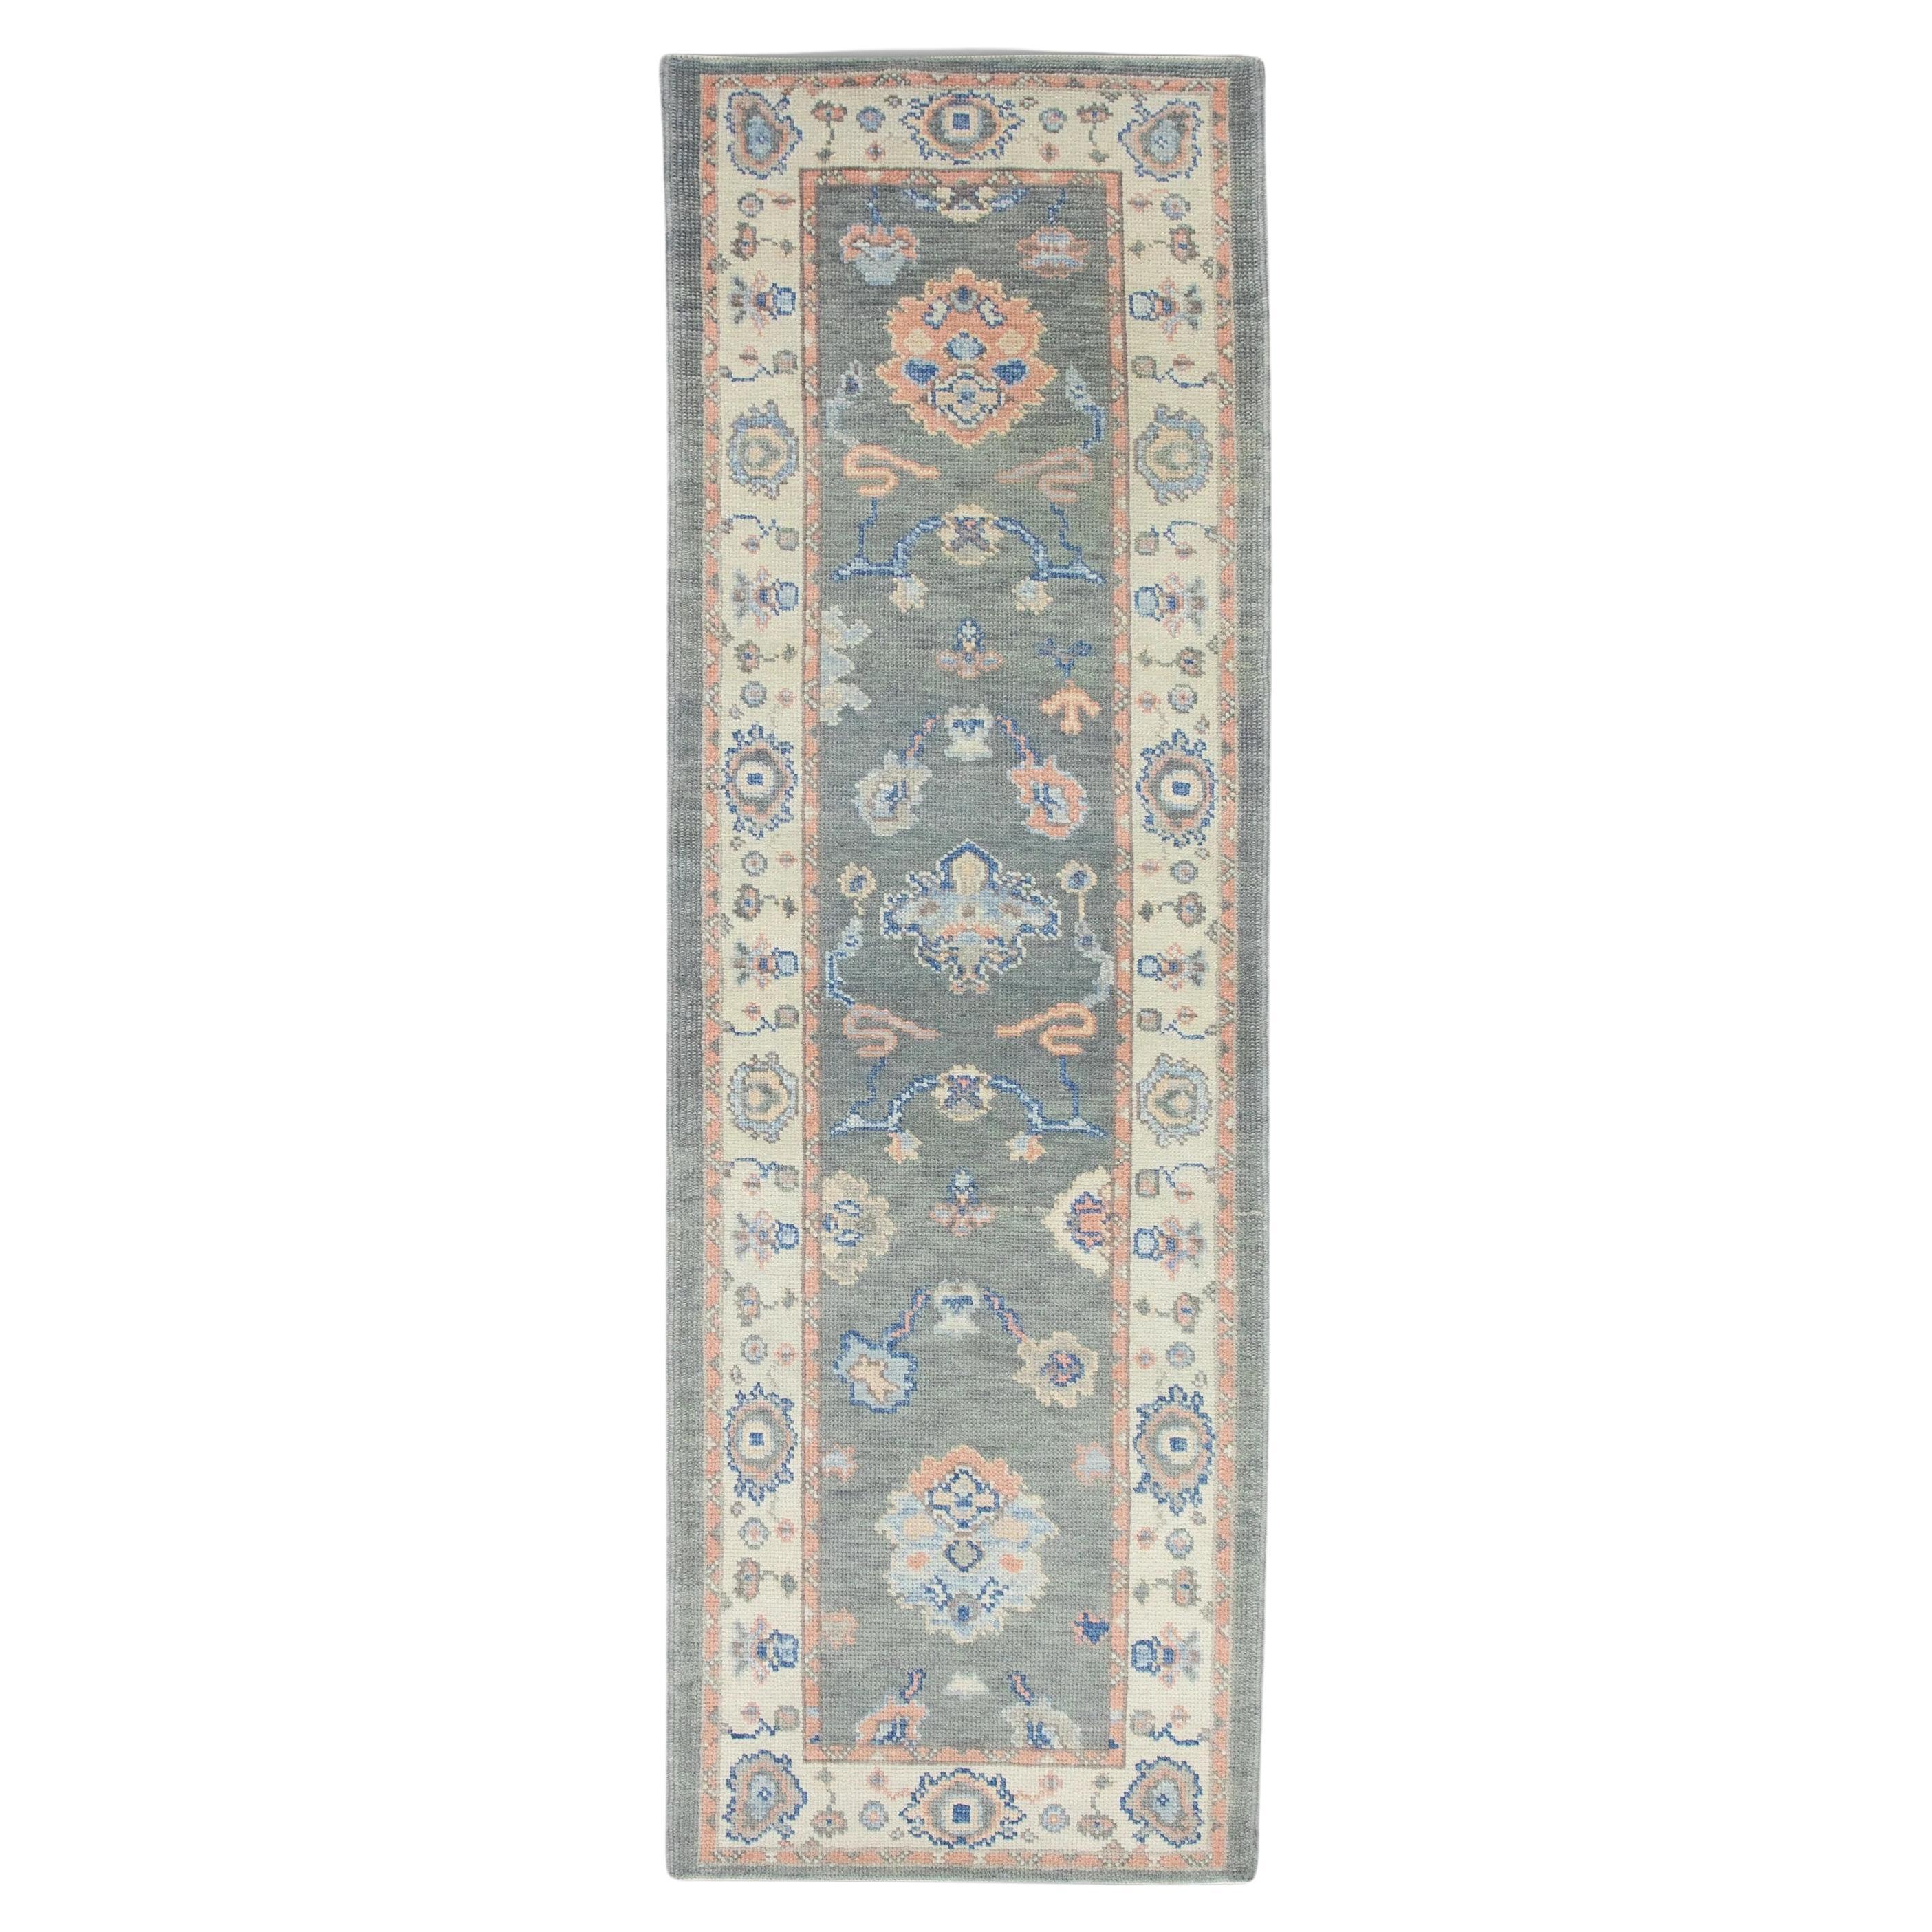 Gray Handwoven Wool Turkish Oushak Rug in Pink & Blue Floral Design 2'7" x 7'11"